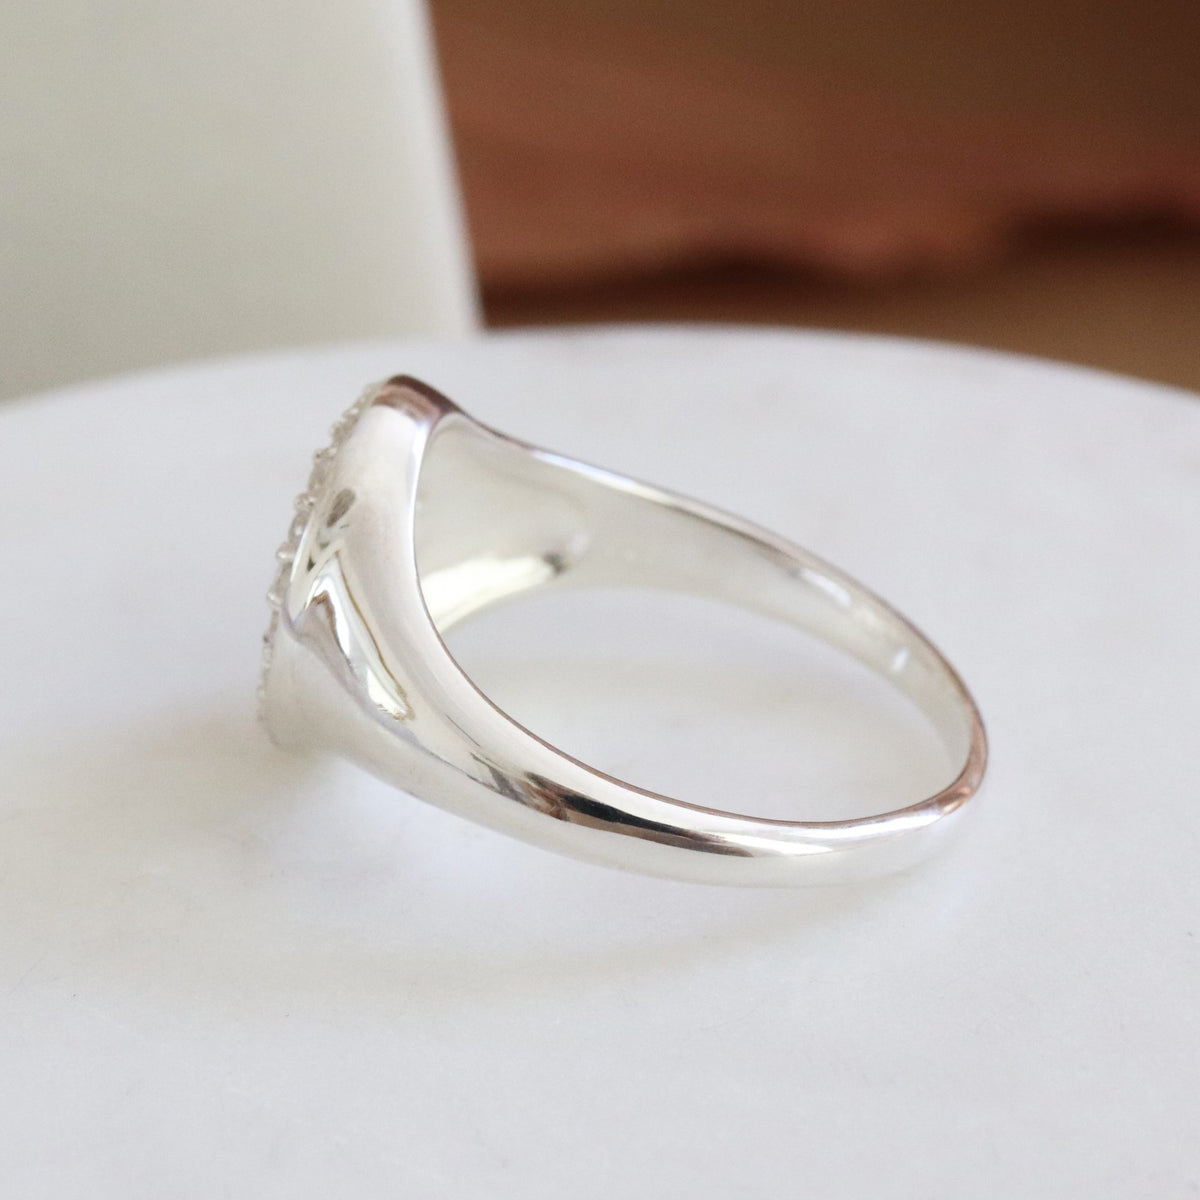 LOVE OVAL SIGNET RING - CUBIC ZIRCONIA &amp; SILVER - SO PRETTY CARA COTTER